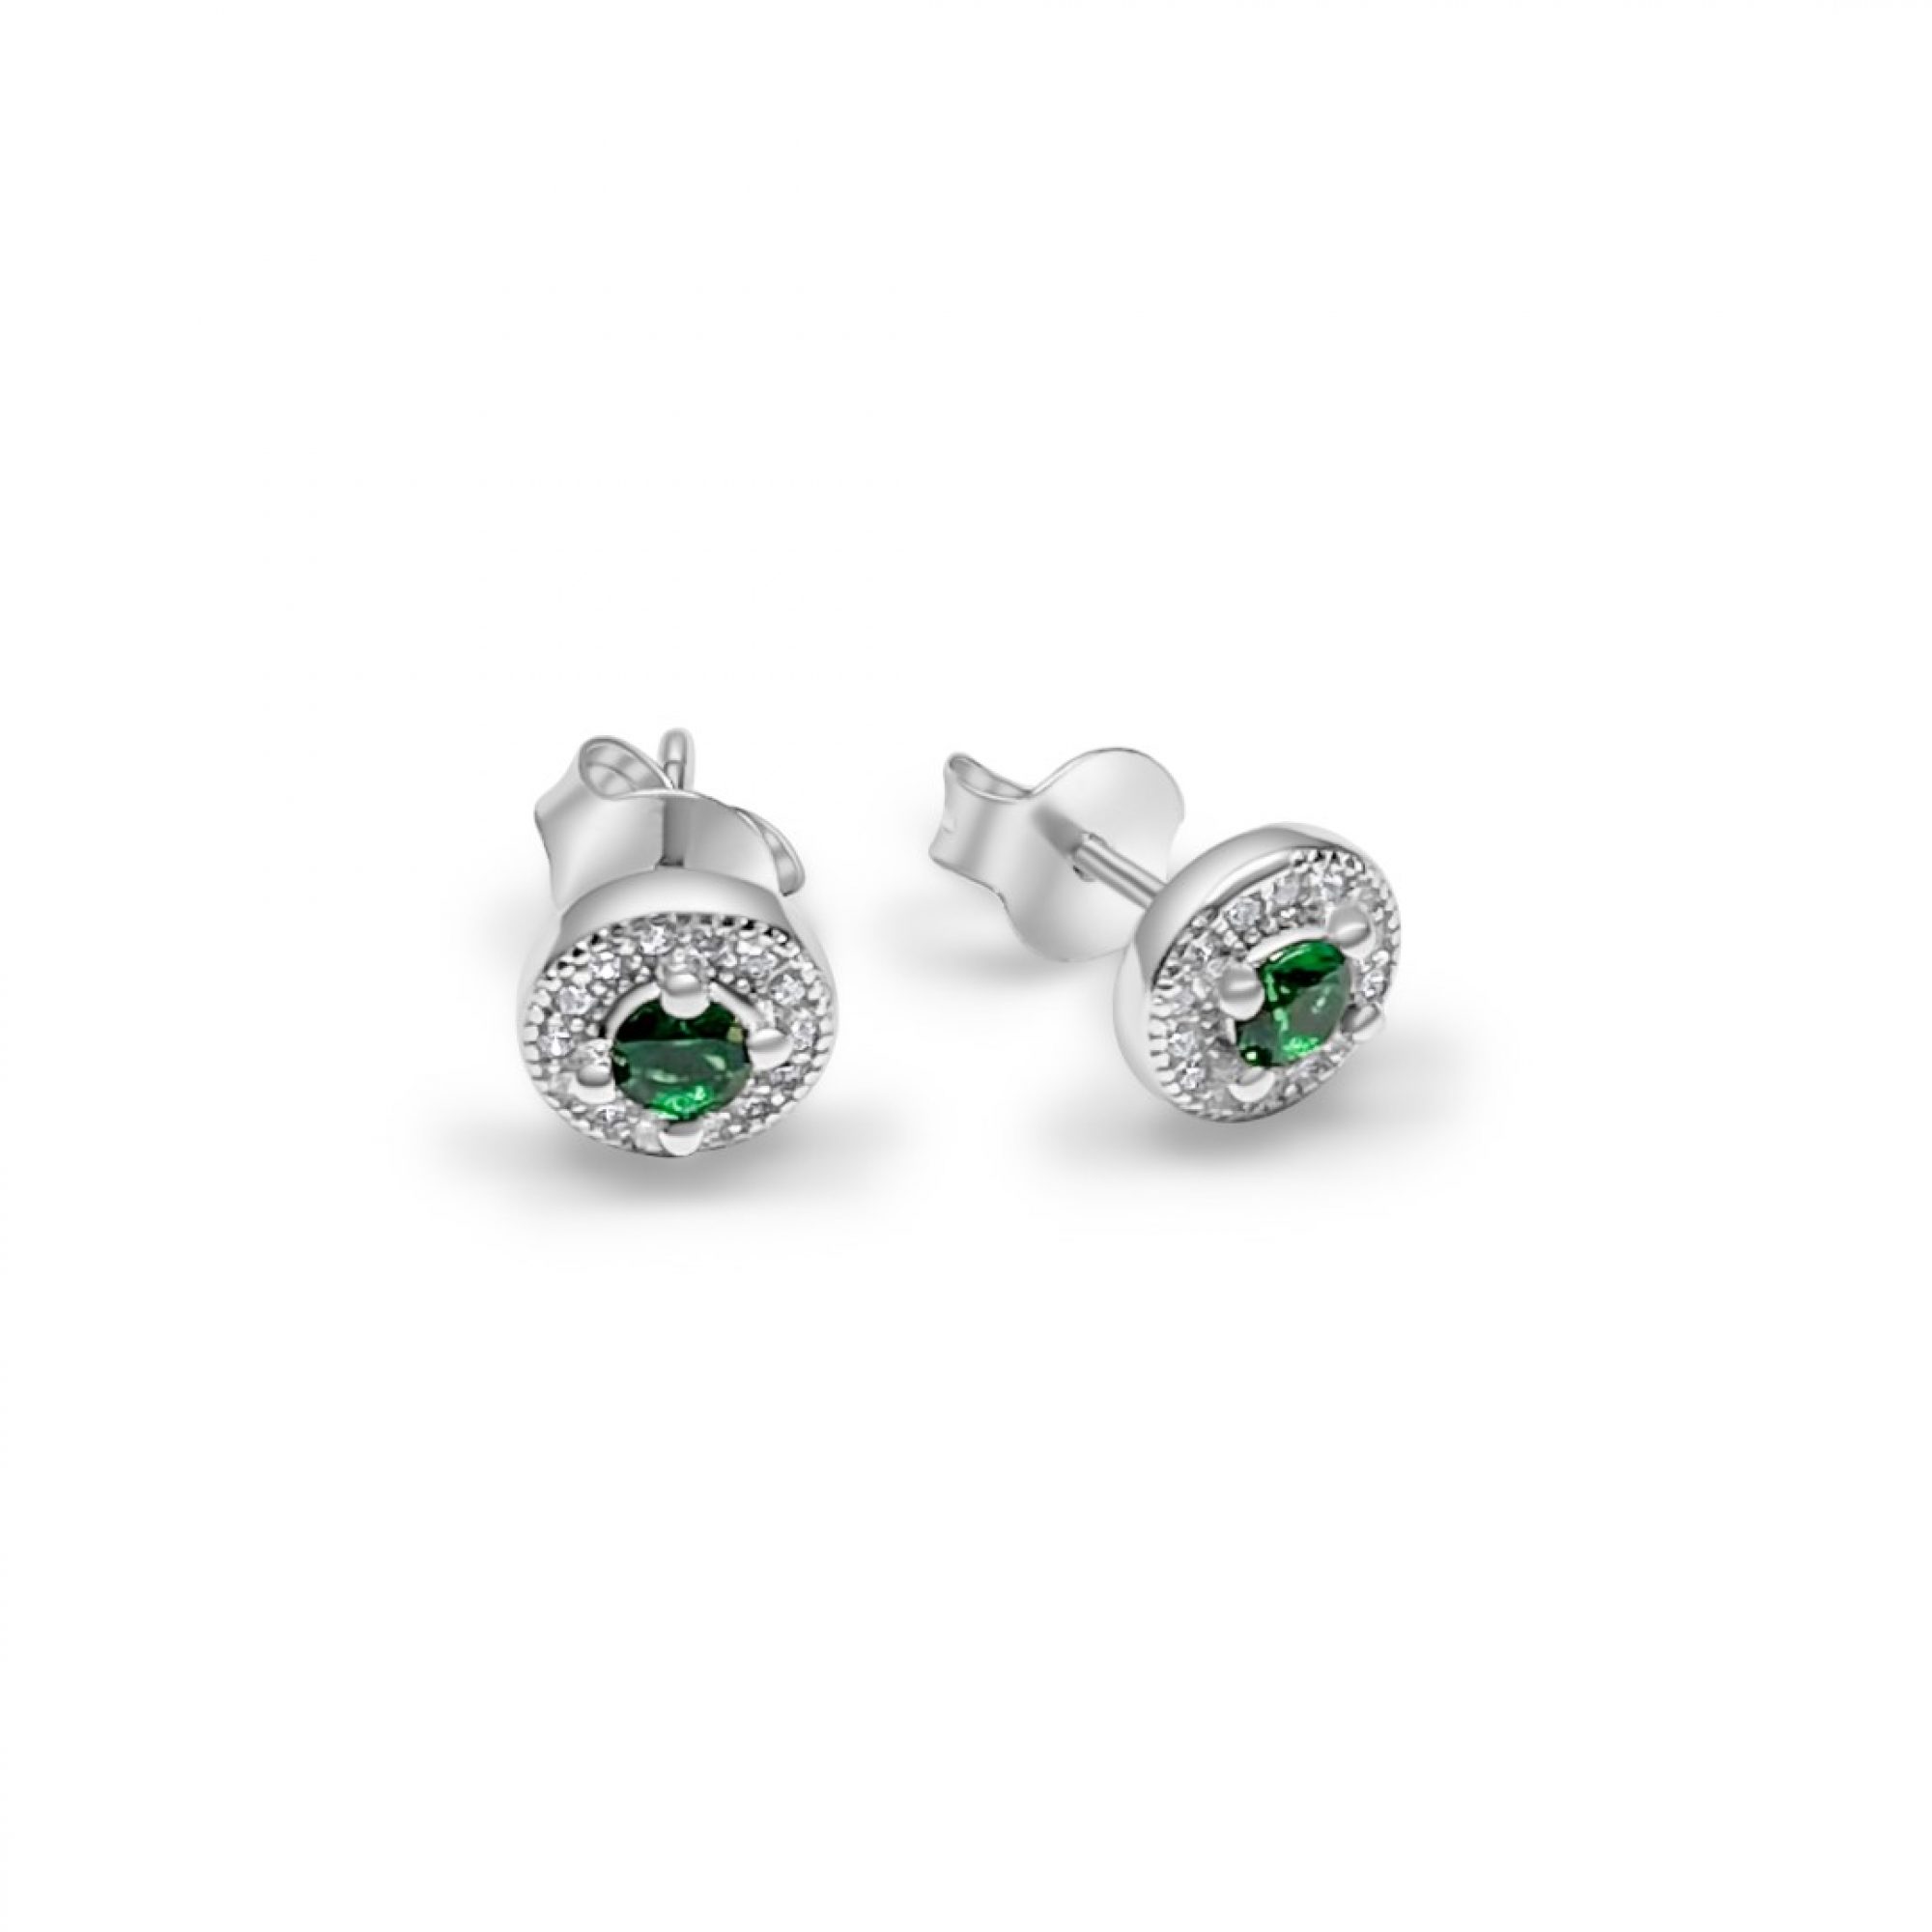 Silver stud earrings with emerald and zircon stones